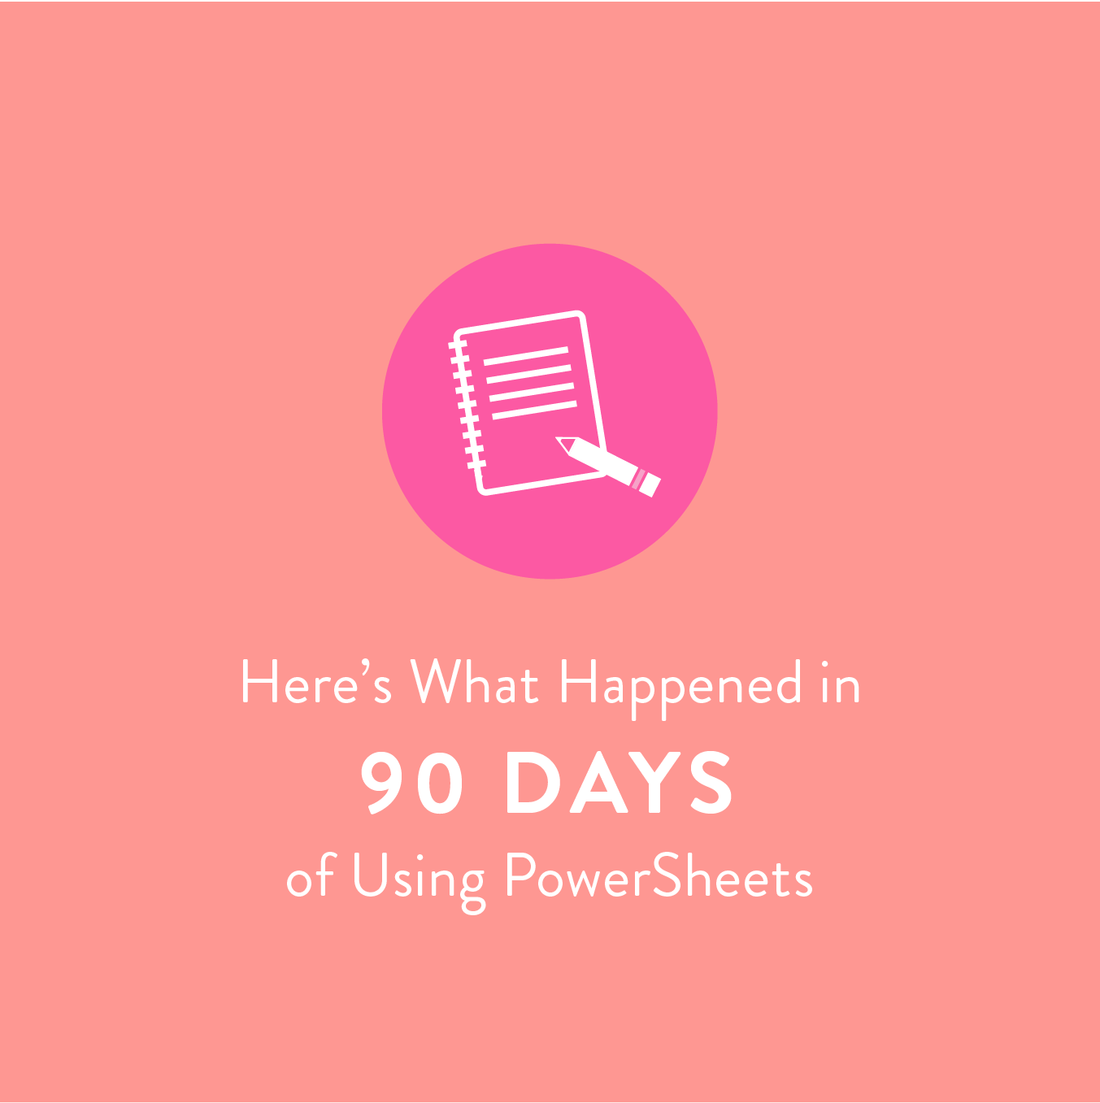 Here's what happened in 90 days using PowerSheets®